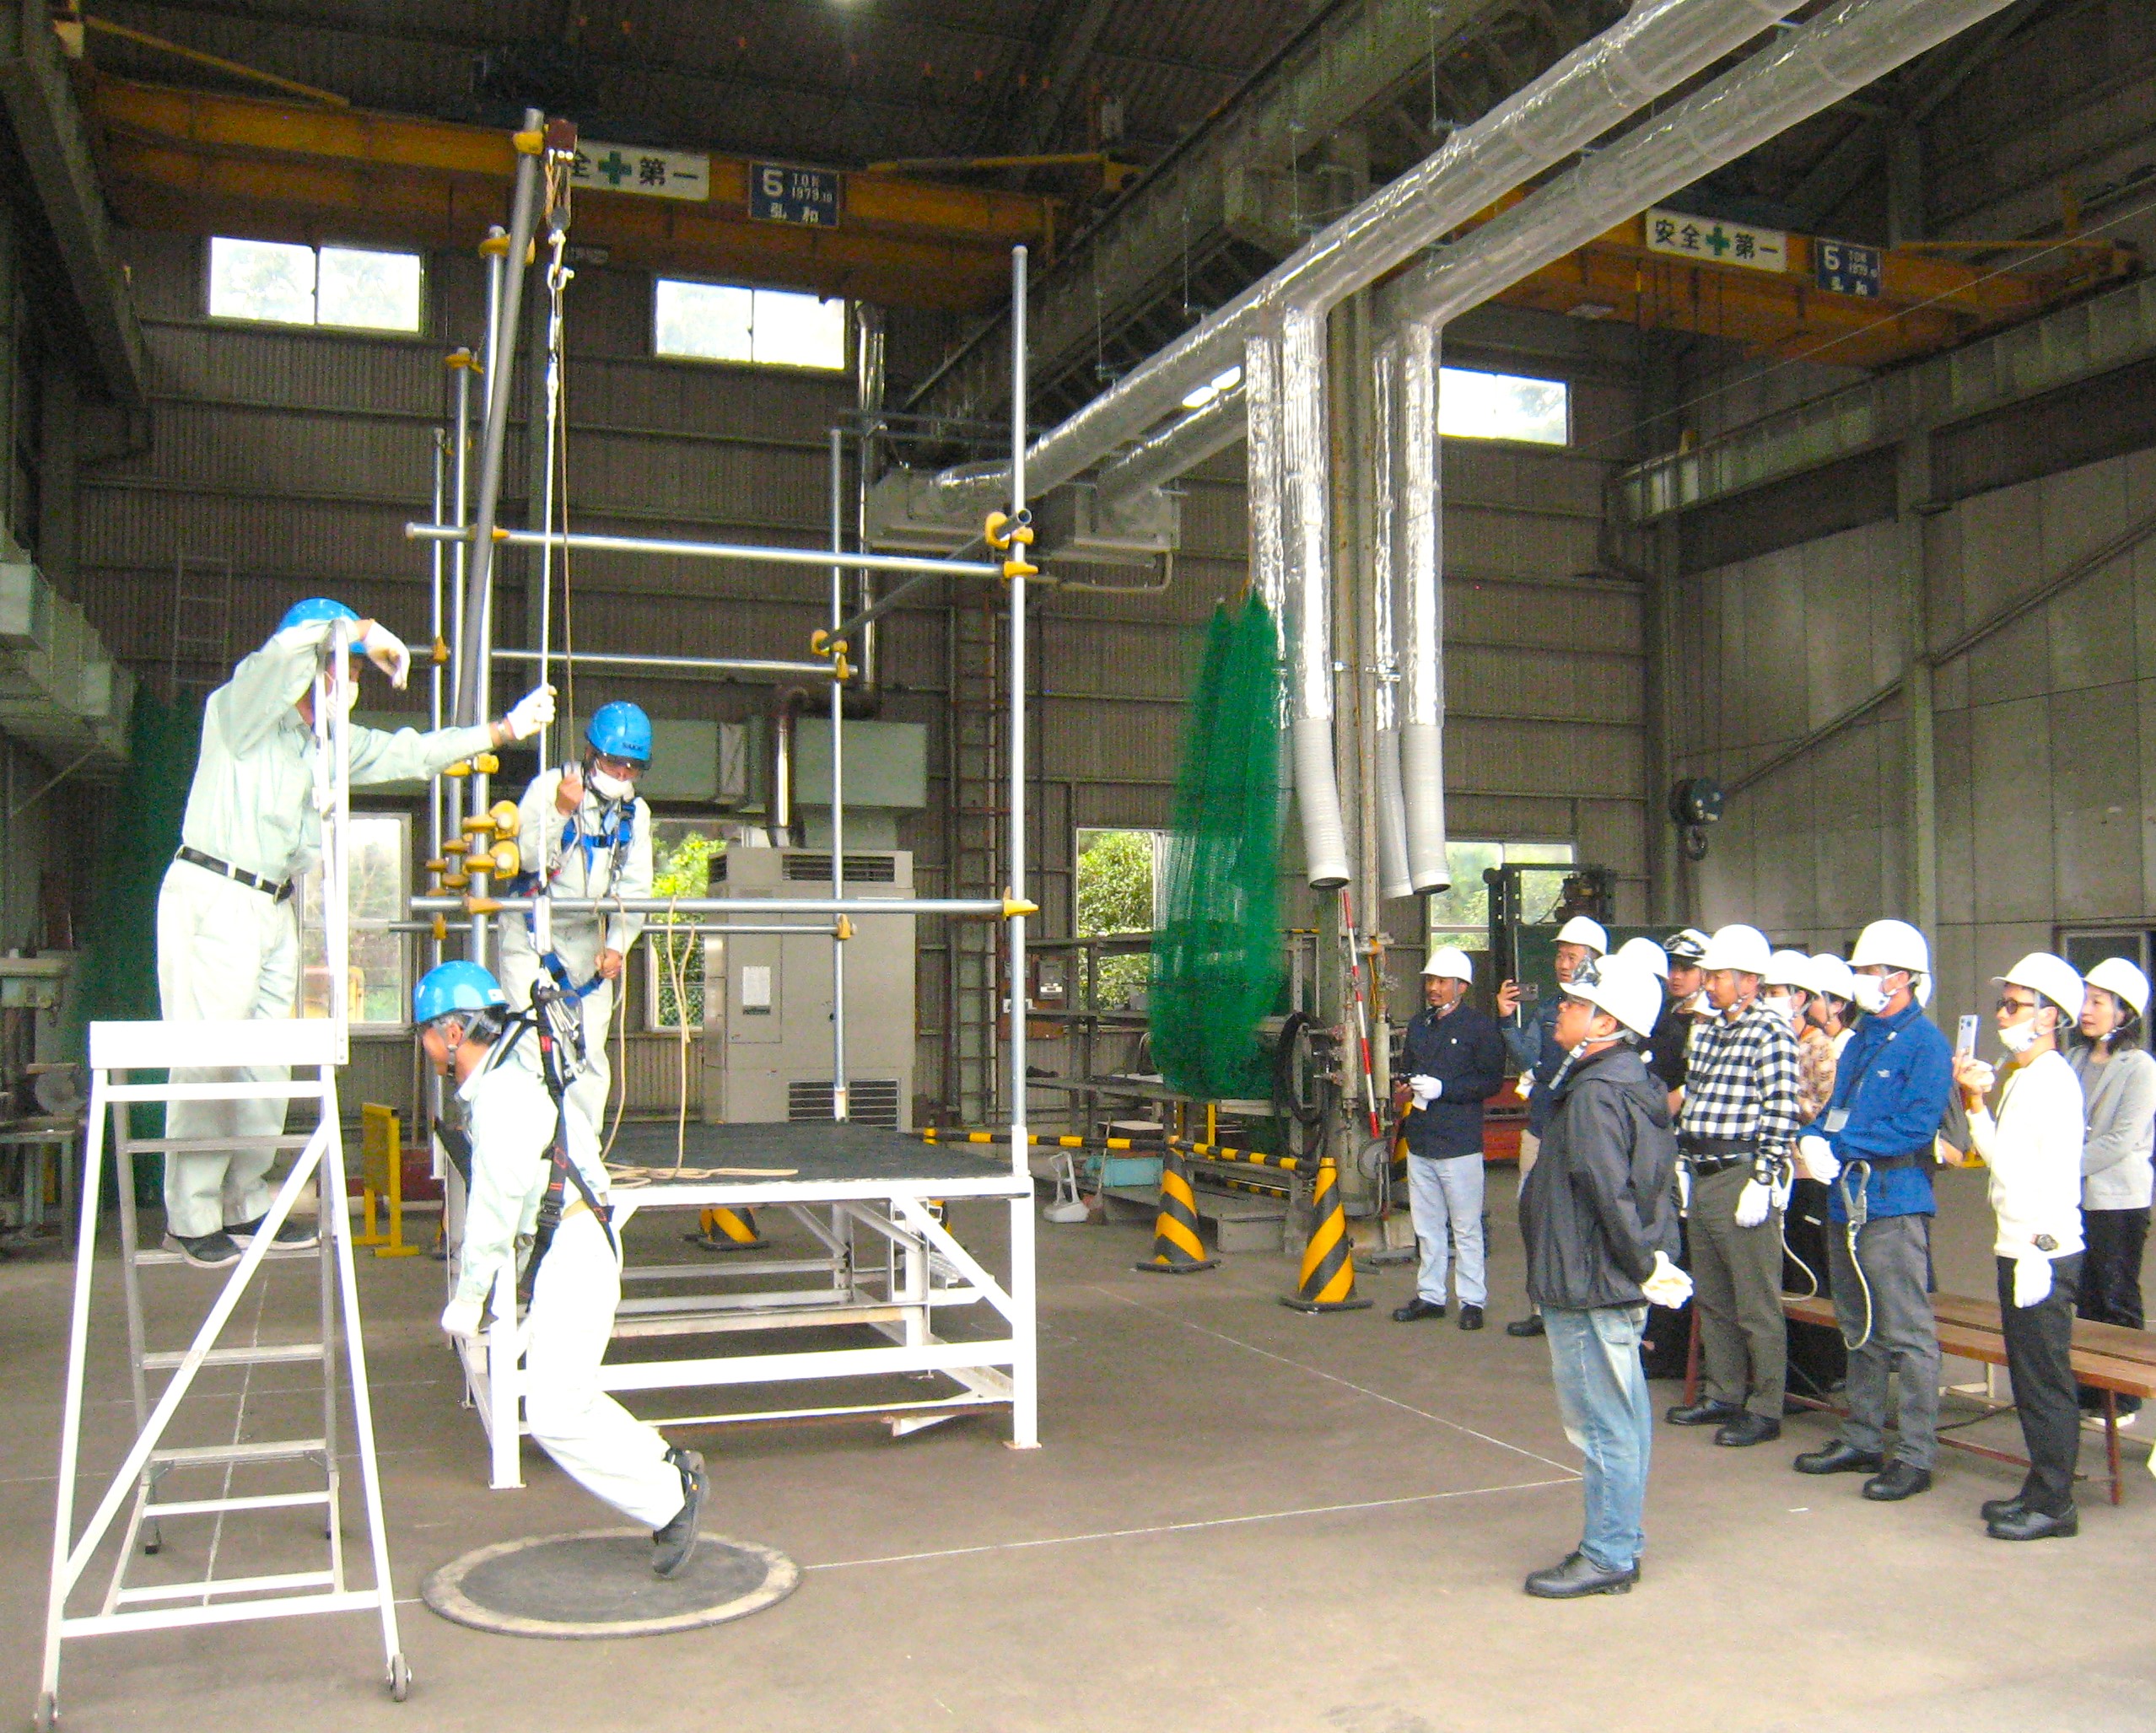 Hands-on practice demonstrating fall prevention using a full harness　(at Sakai Heavy Industries Training Center)